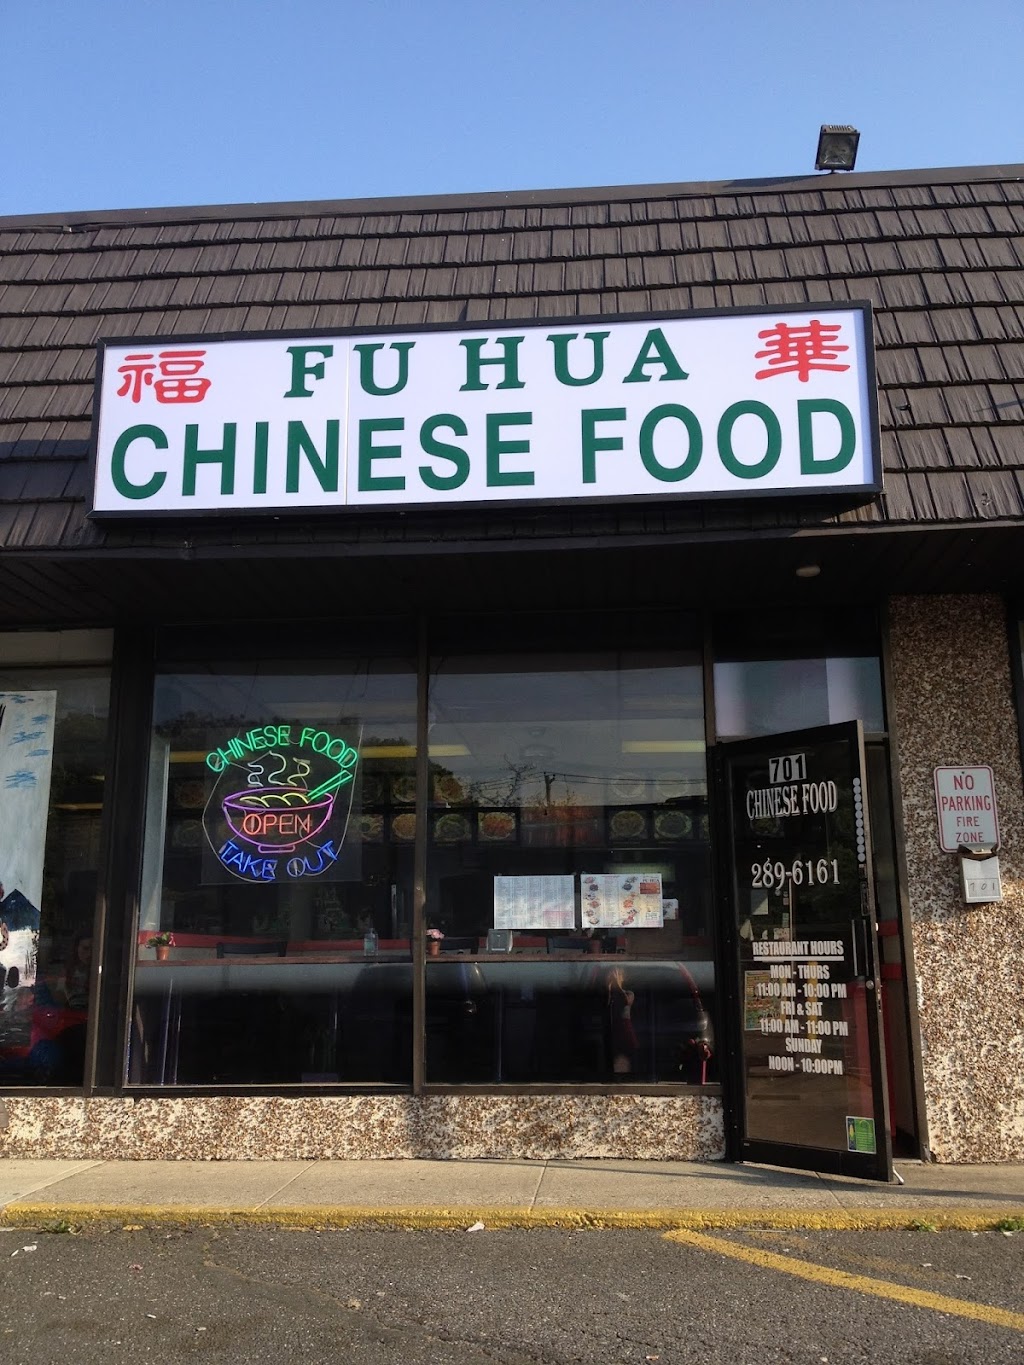 Fu Hua Chinese Food | 701 Medford Ave, East Patchogue, NY 11772 | Phone: (631) 289-6161